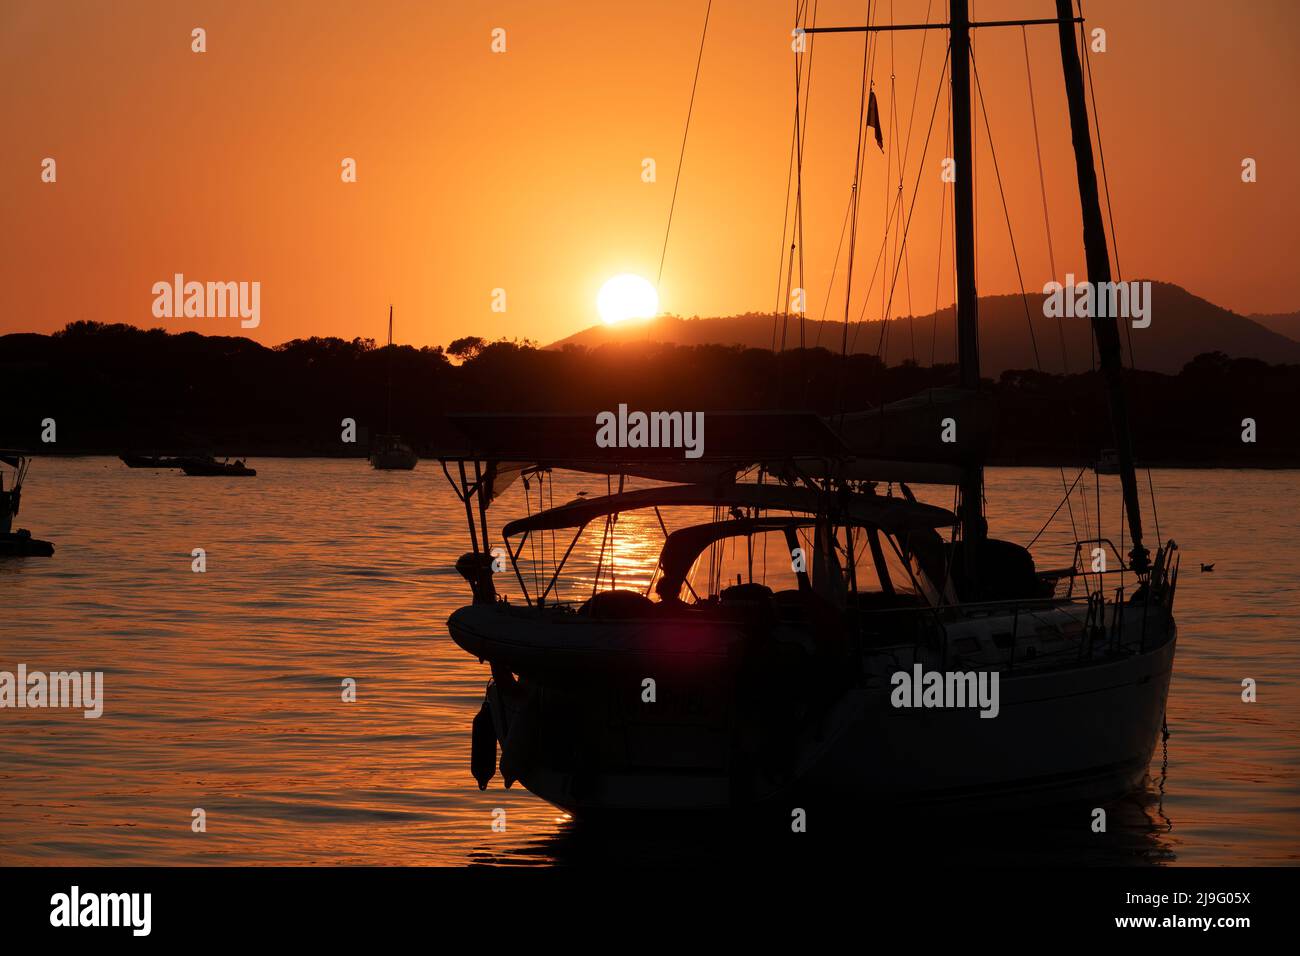 A white sailboat sails on the sea with an orange sunset Stock Photo